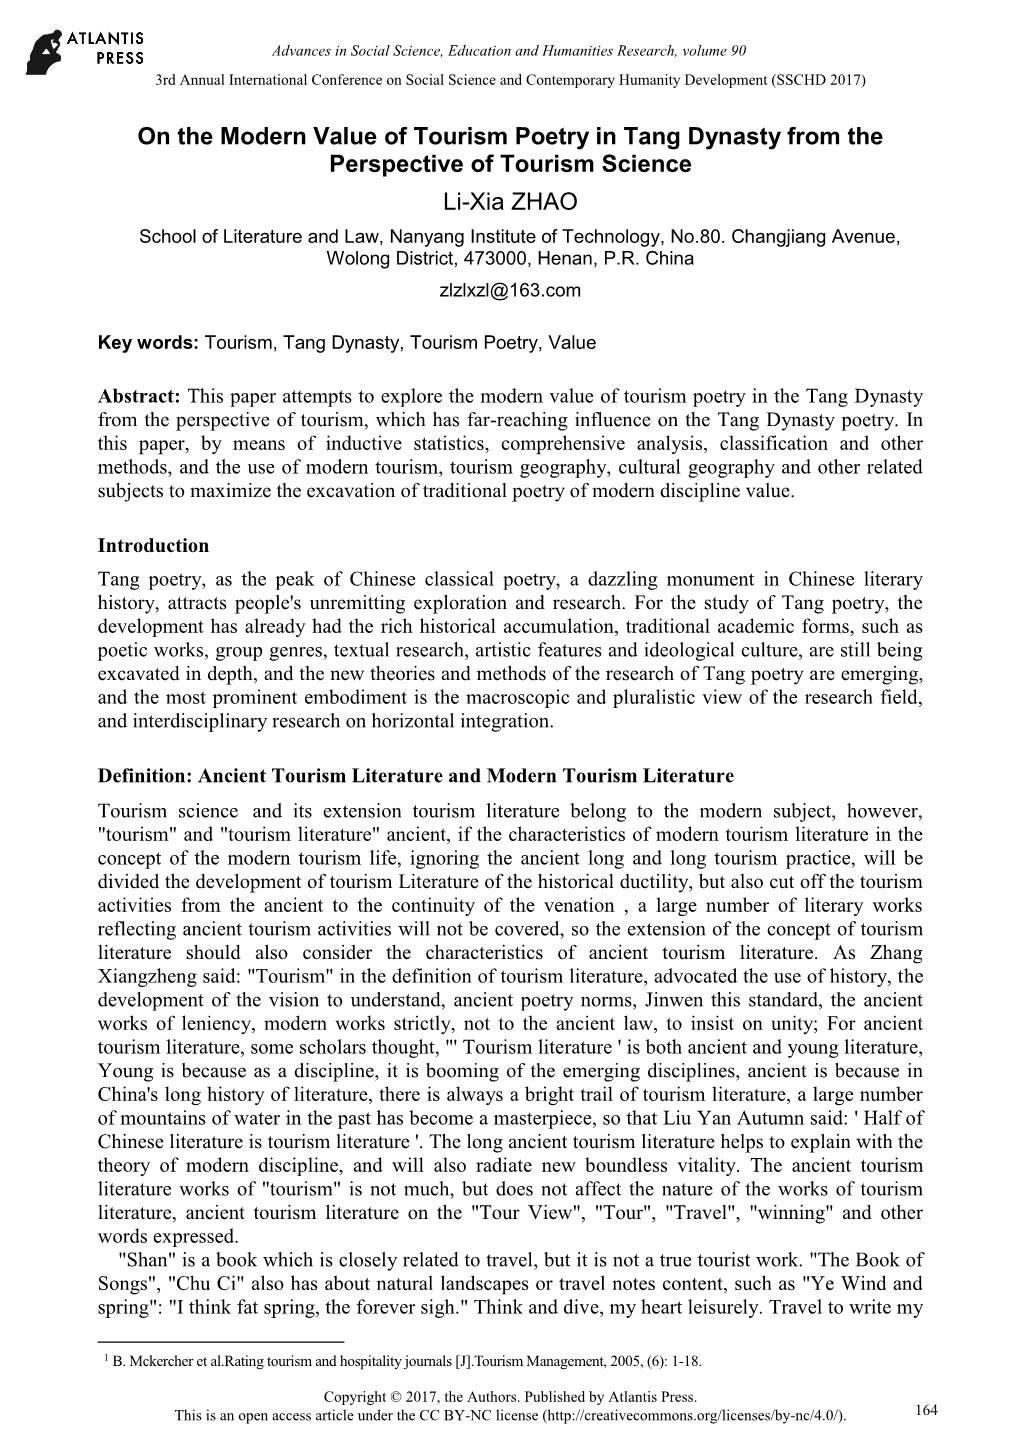 On the Modern Value of Tourism Poetry in Tang Dynasty from The